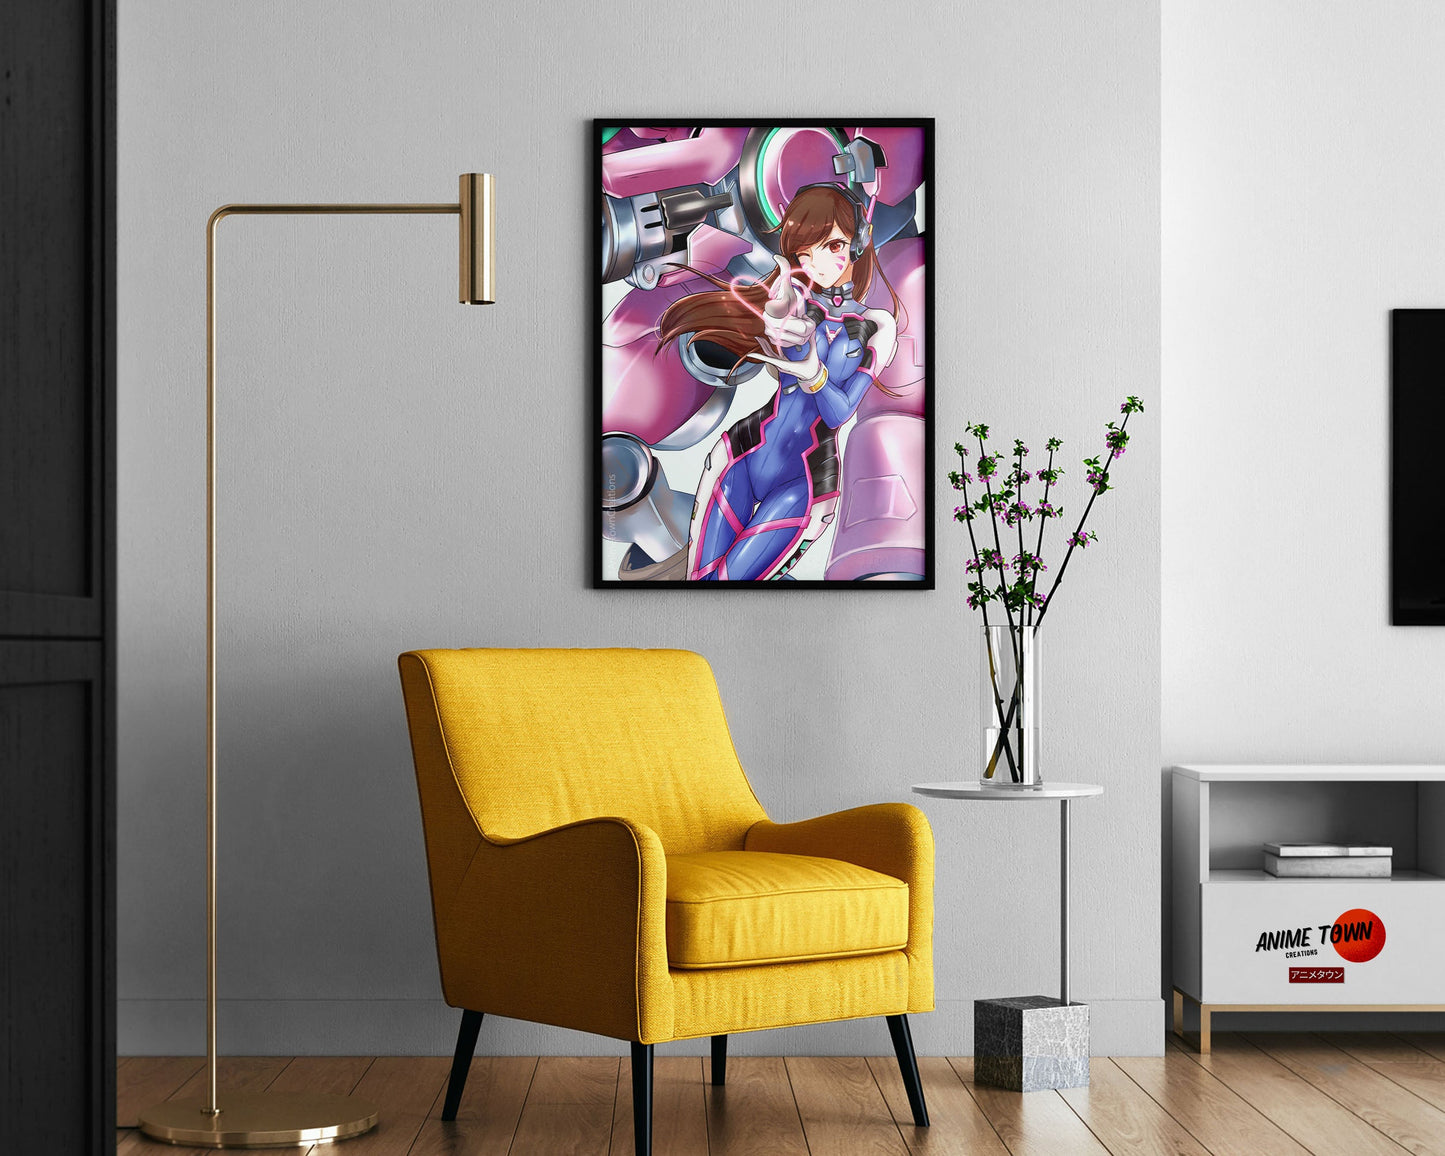 Anime Town Creations Poster Overwatch D.Va 11" x 17" Home Goods - Anime Overwatch Poster